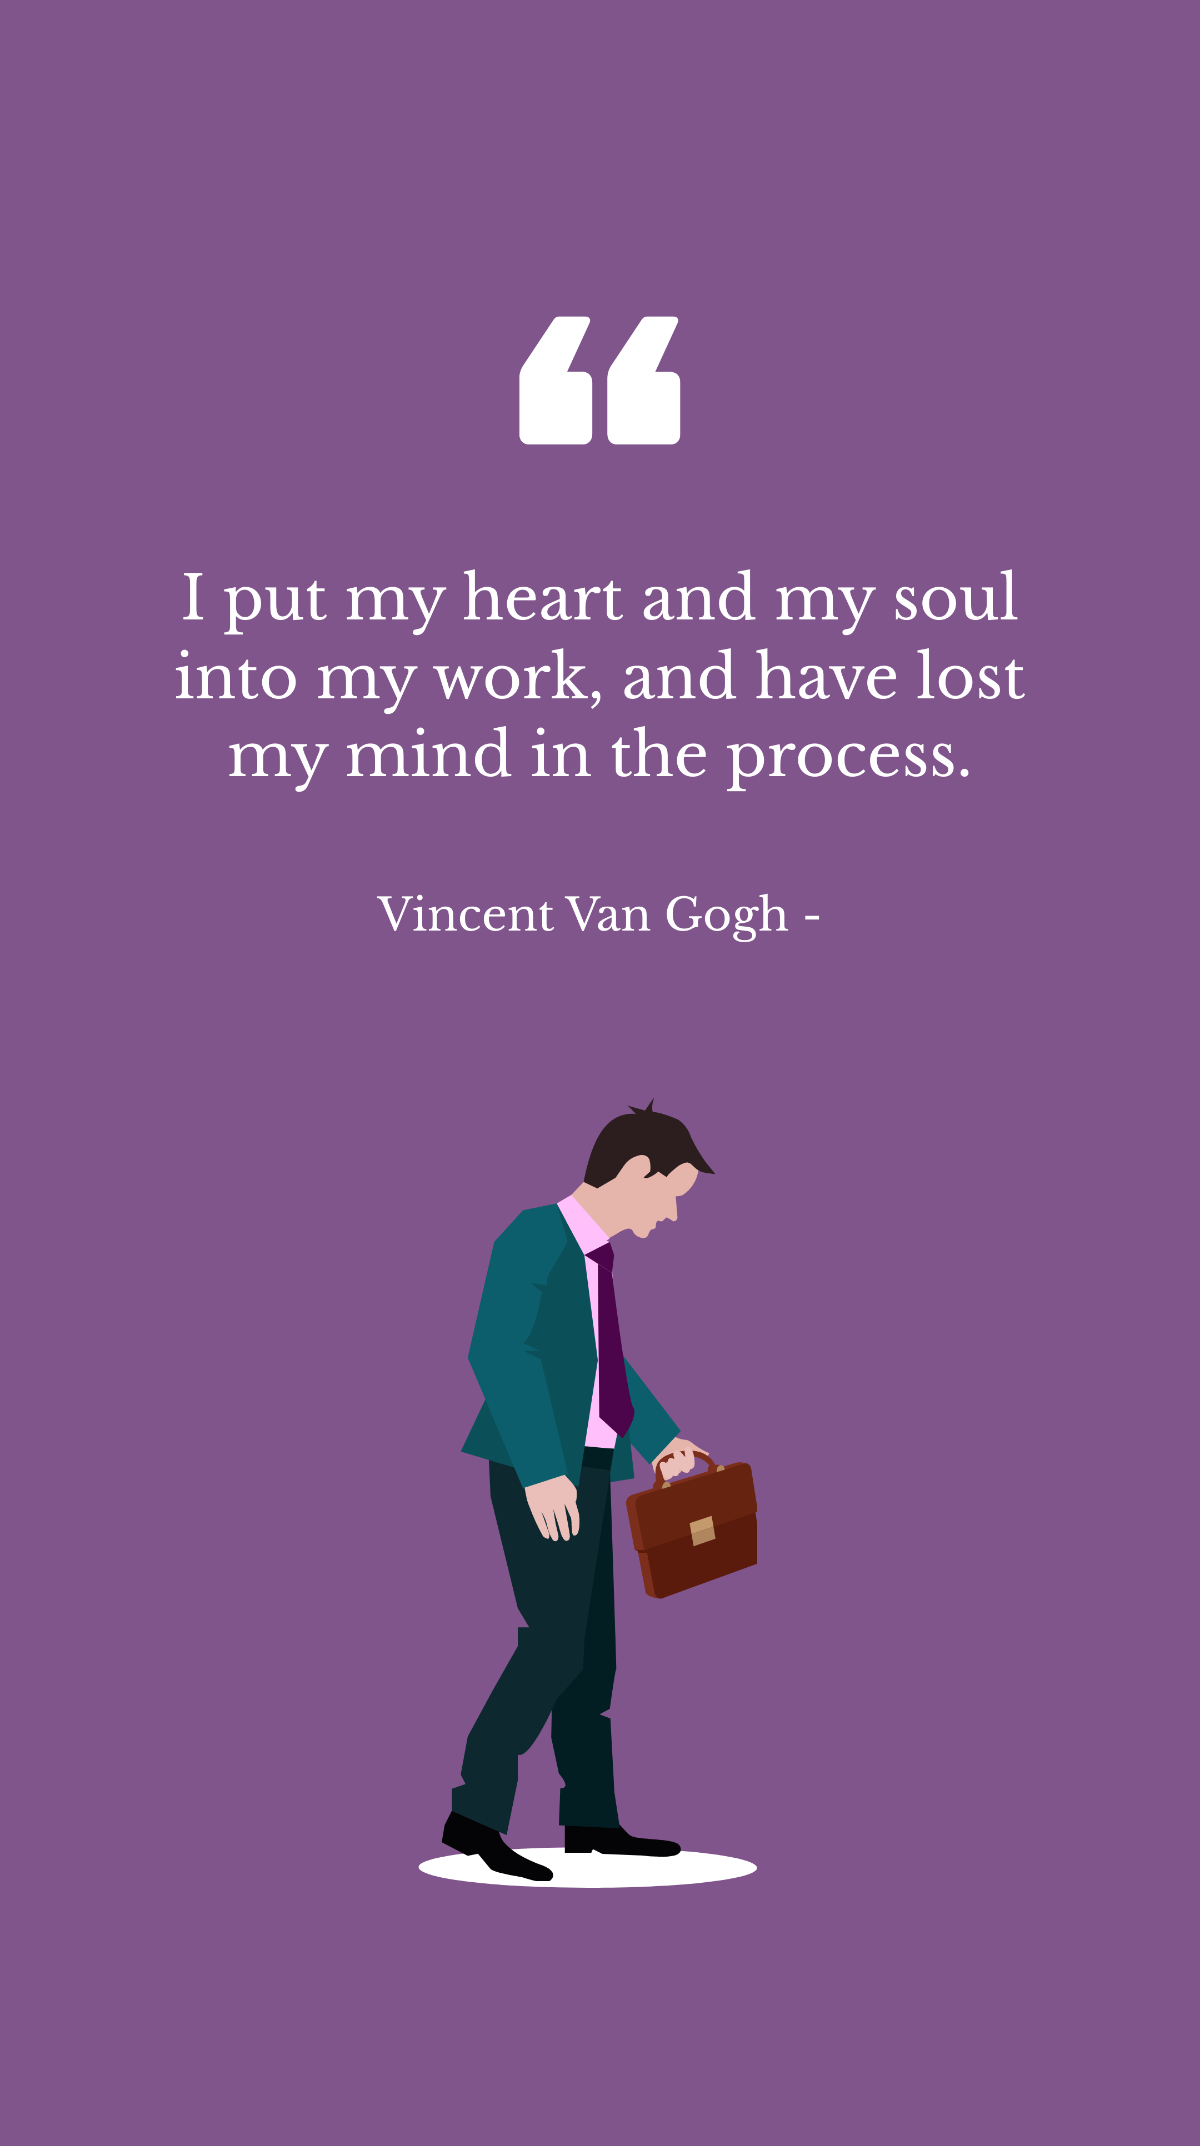 Free Vincent Van Gogh - I put my heart and my soul into my work, and have lost my mind in the process. Template